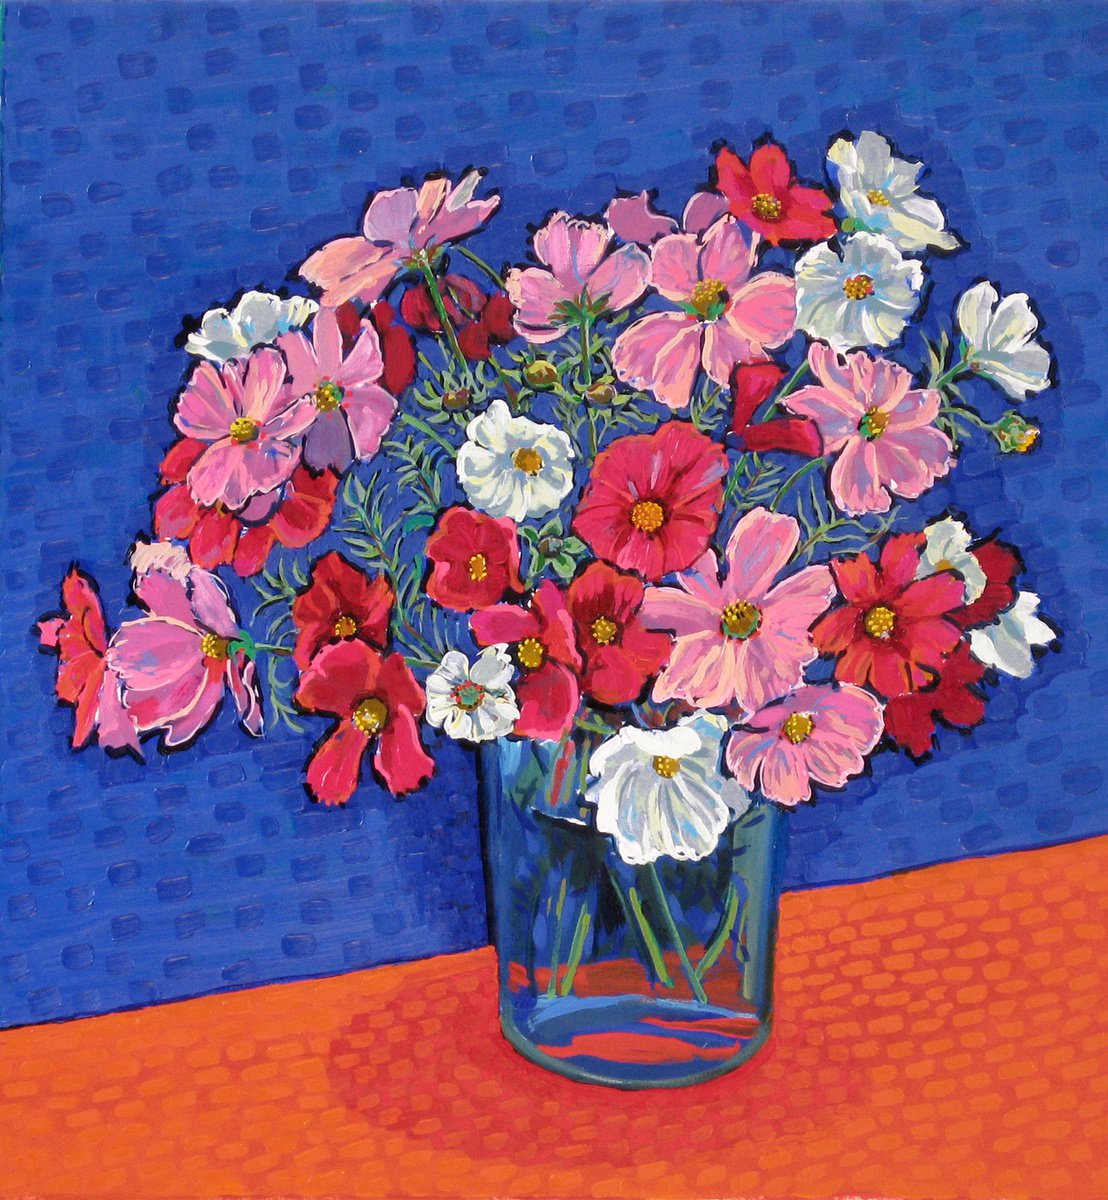 Flowers, Cosmos by Richard Gibson